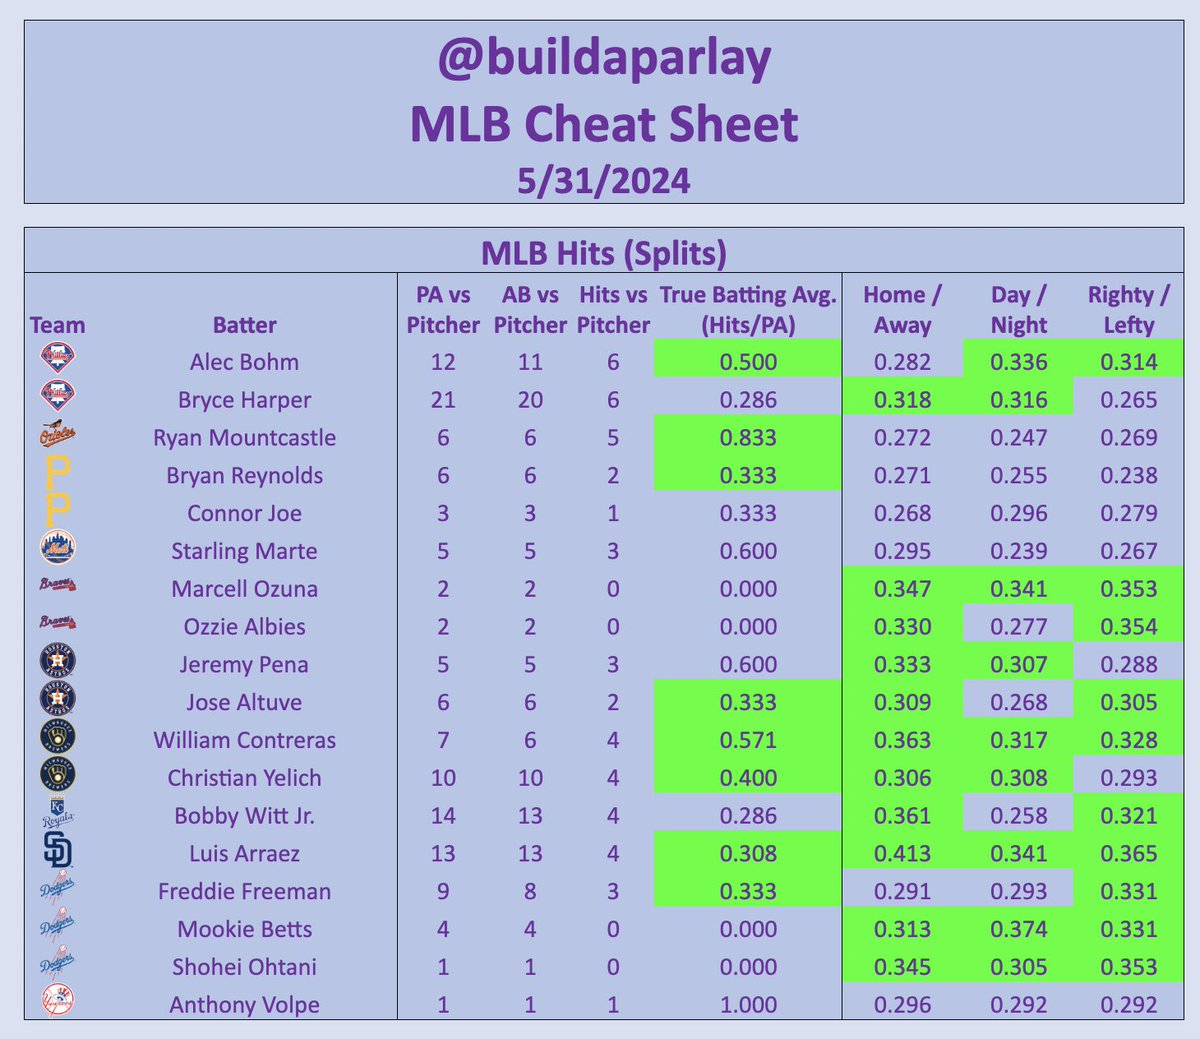 ⚾️MLB Hits (Splits) Sheet⚾️ Quick snapshot of some of the top BvP targets & split stats from our deep dive matchup analysis. These sheets might become discord exclusive after the next week or so. Access all daily plays & cheat sheets in the discord 👇 whop.com/build-a-parlay…